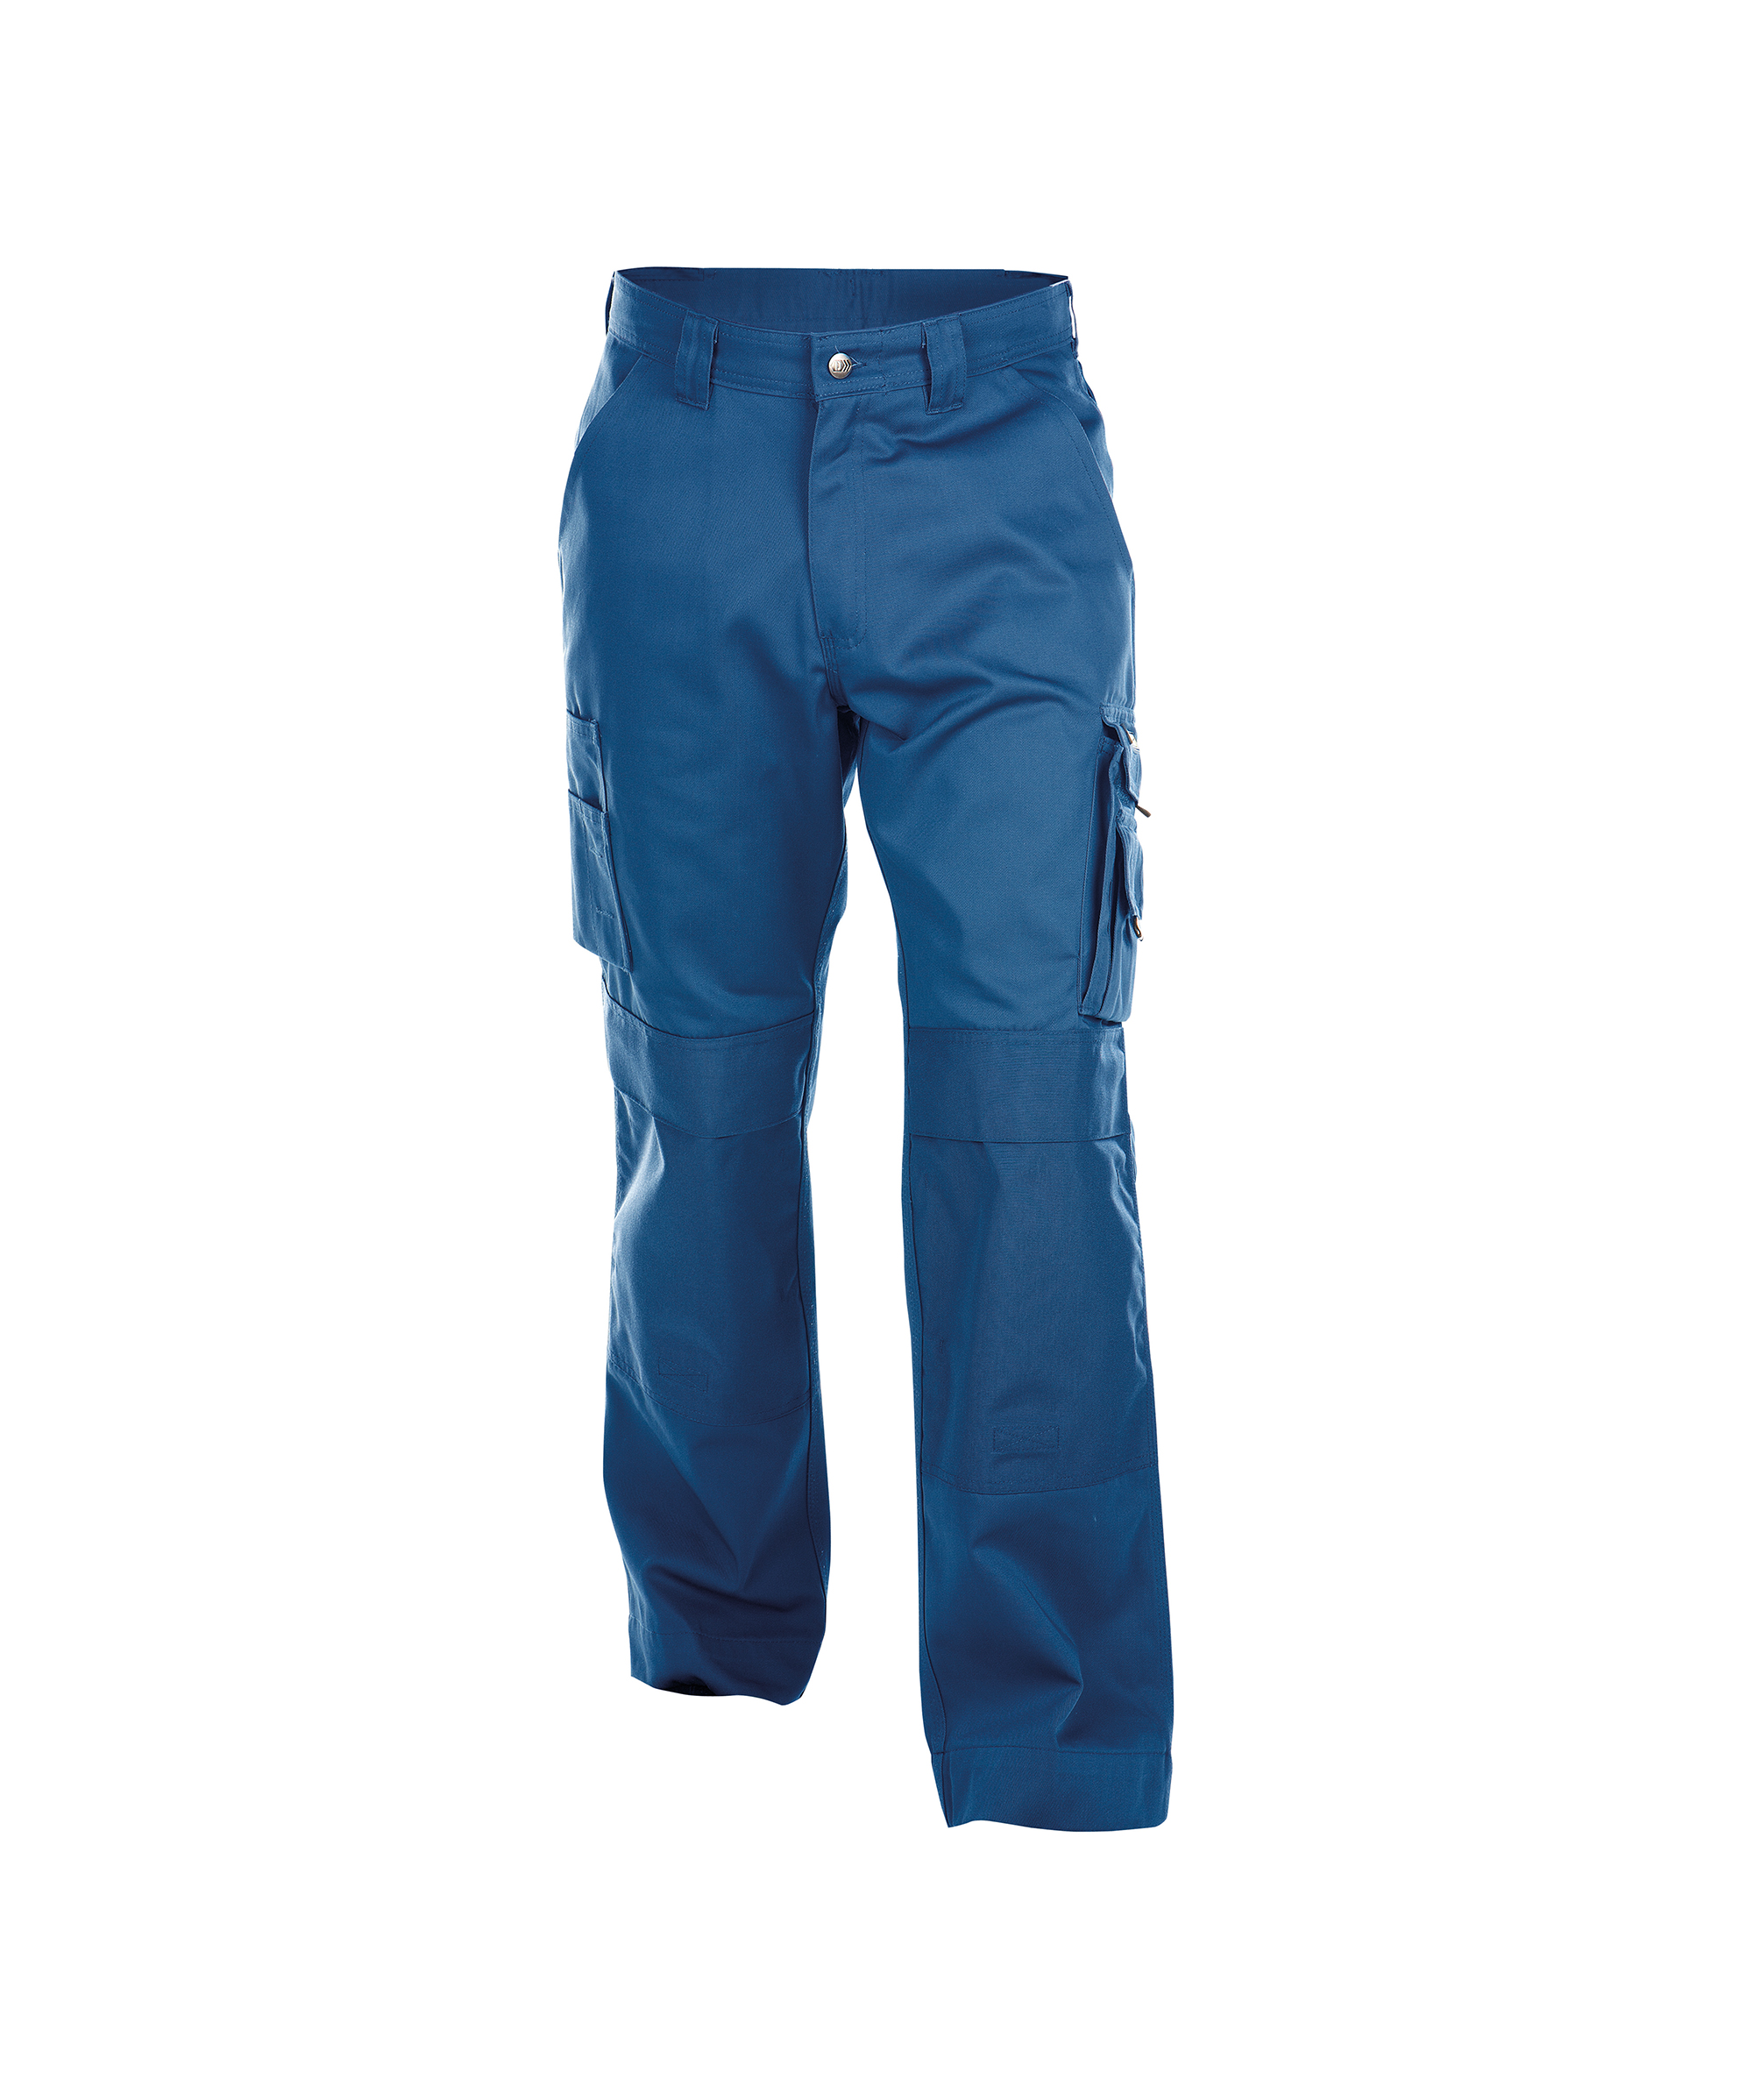 miami_work-trousers-with-knee-pockets_royal-blue_front.jpg